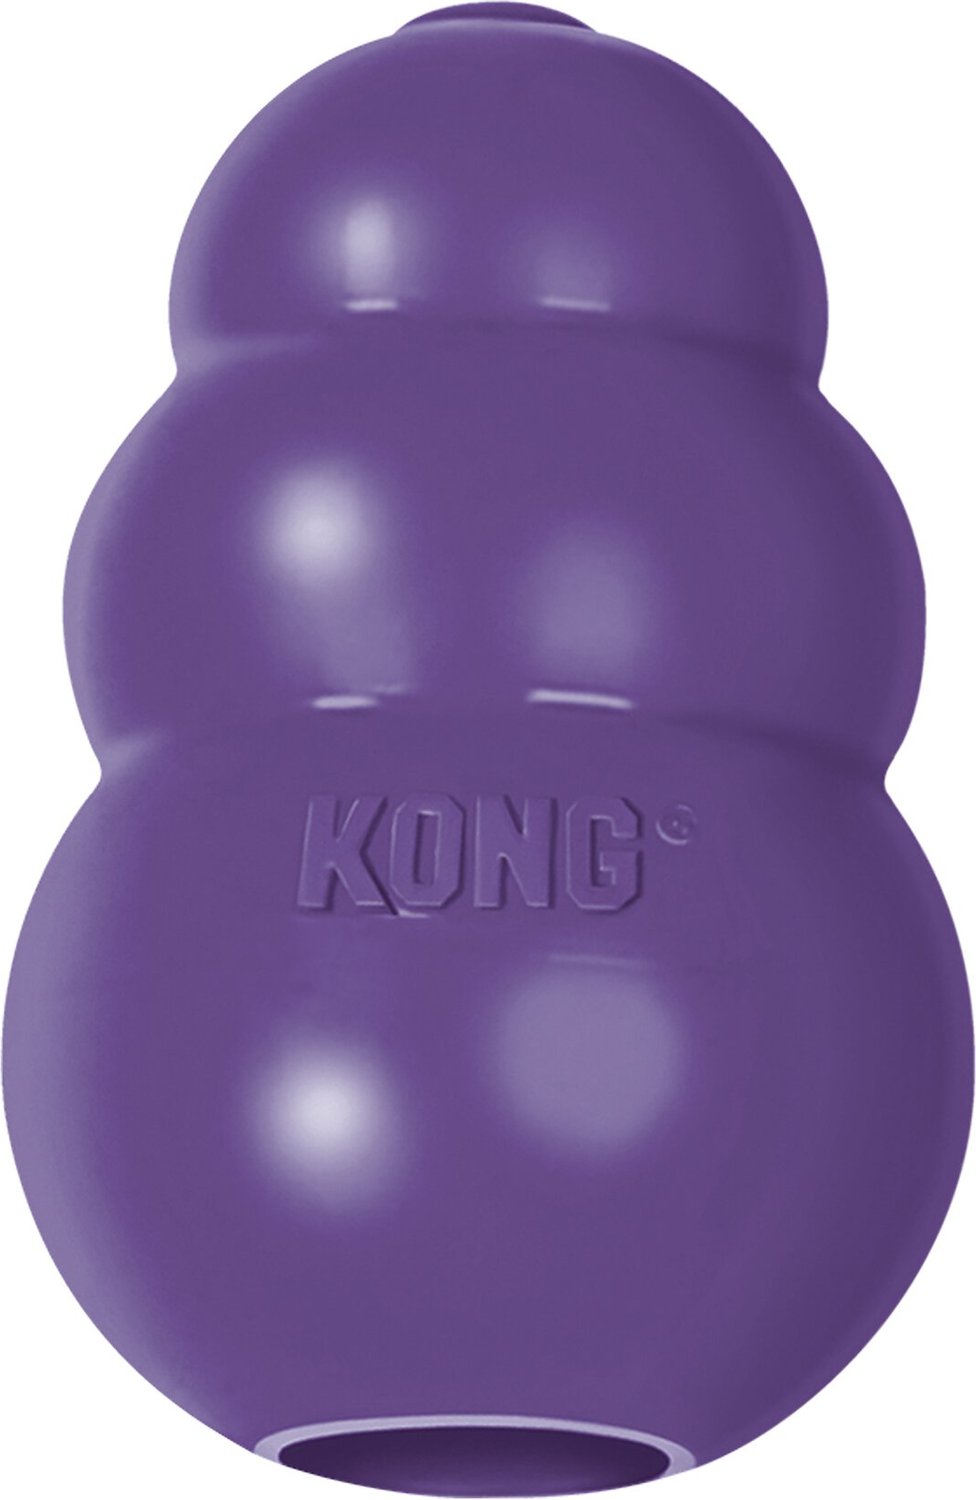 KONG Senior Dog Toy, Small - Chewy.com